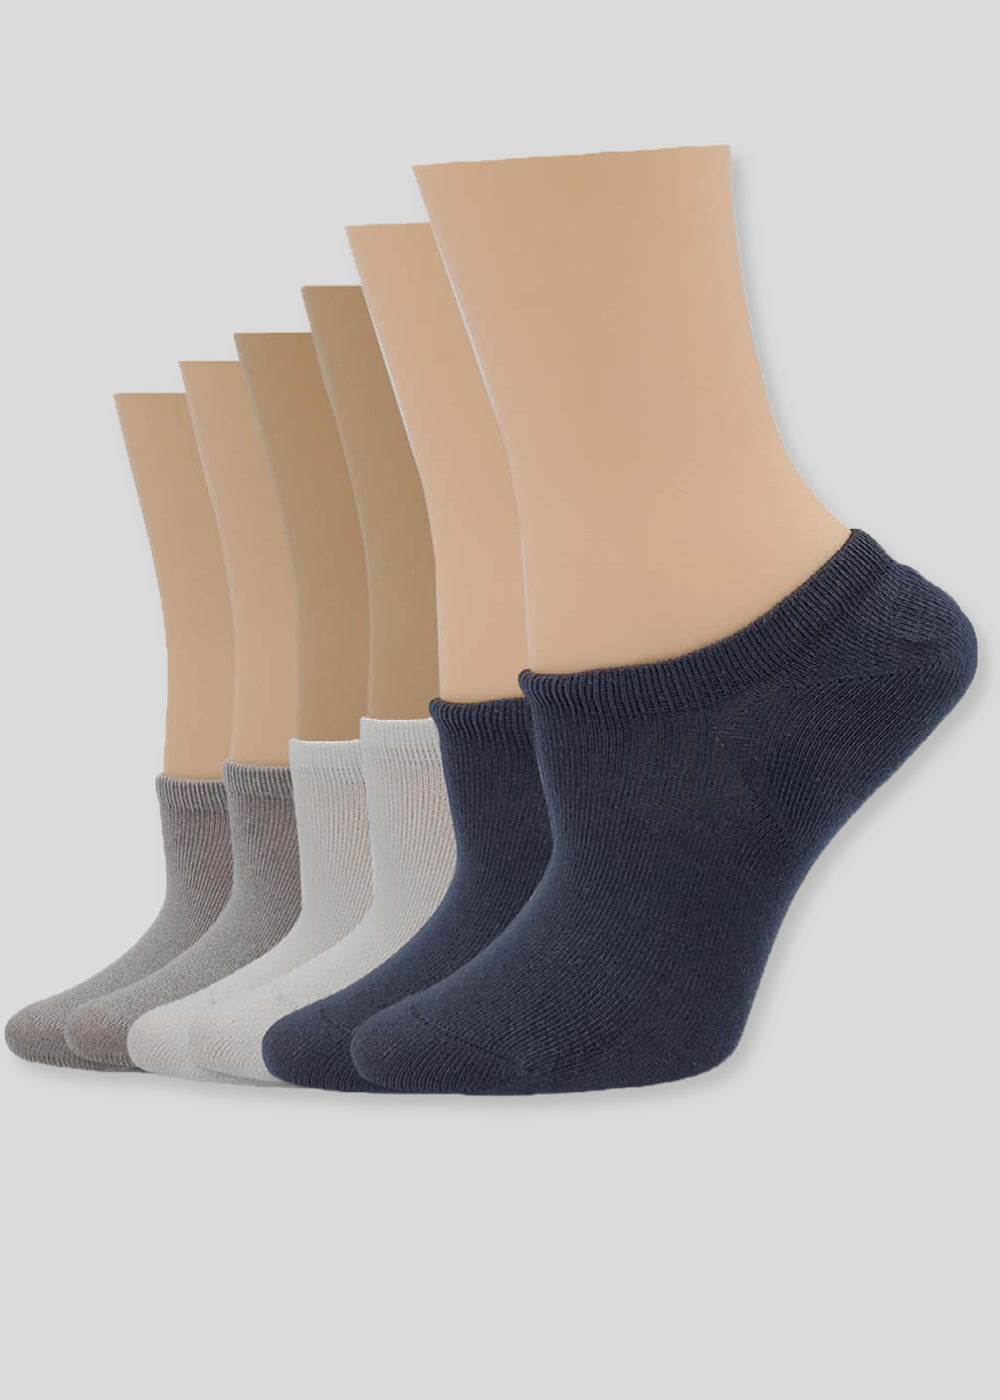 3-Pack No Show Liner Socks from Yummie in Grey/White/Black - 1